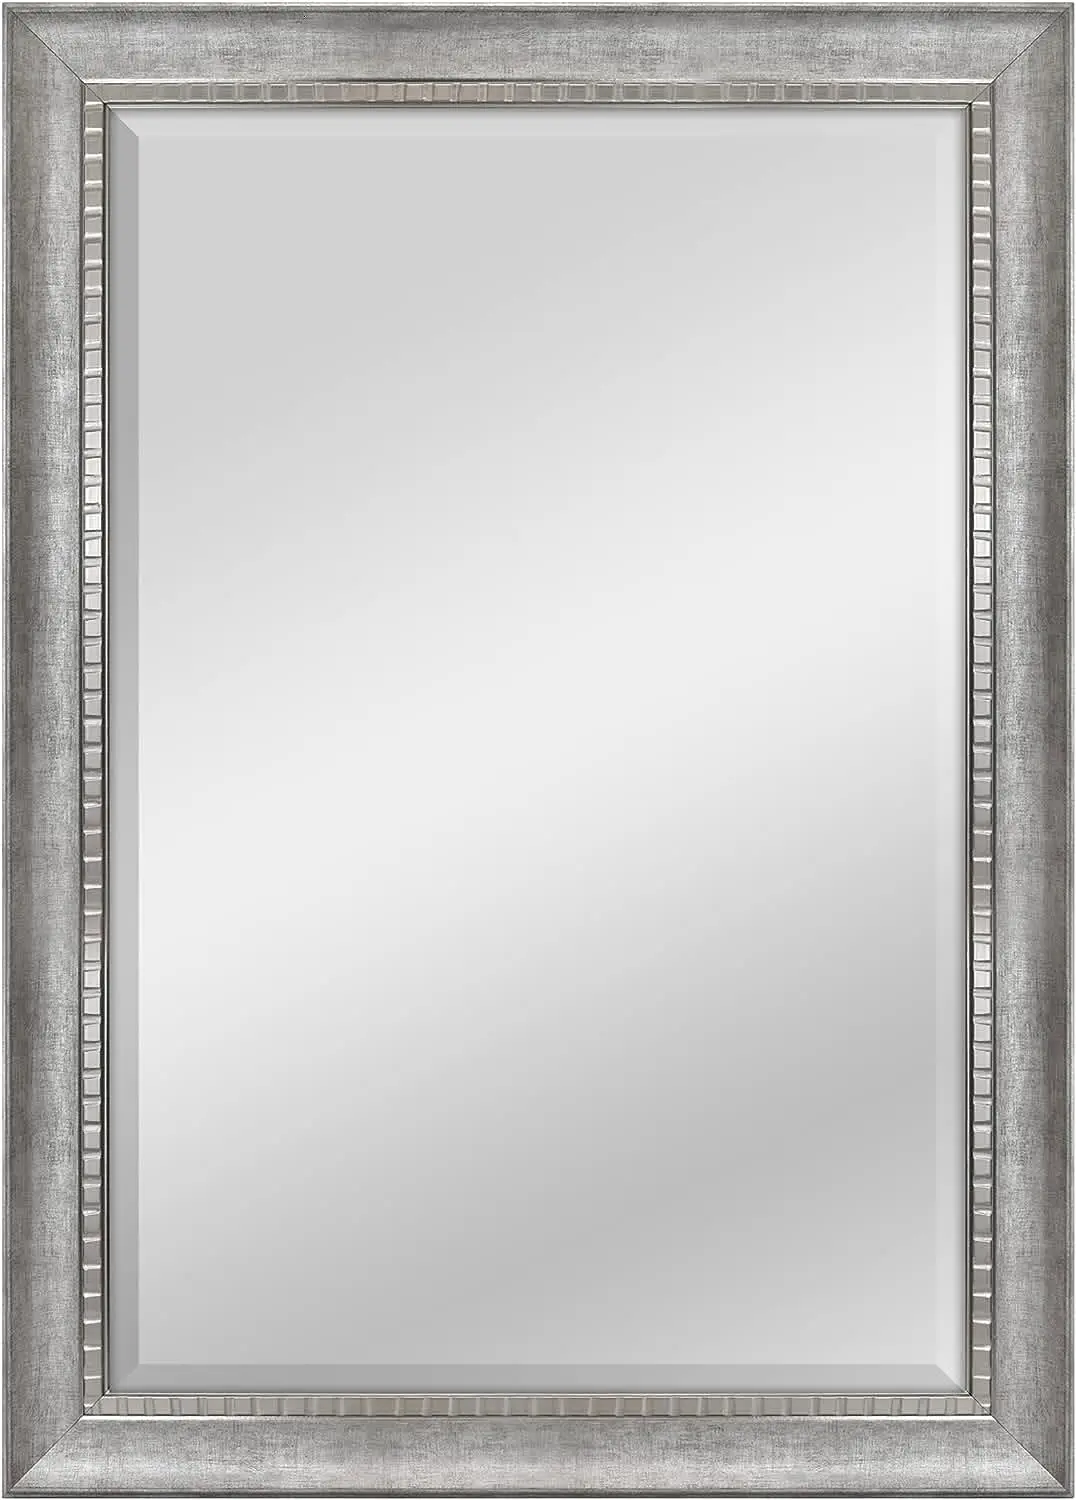 

24x36 Inch Sloped Mirror with Dental Molding Detail, 29.5x41.5 Inch Overall Size, Silver (20565)